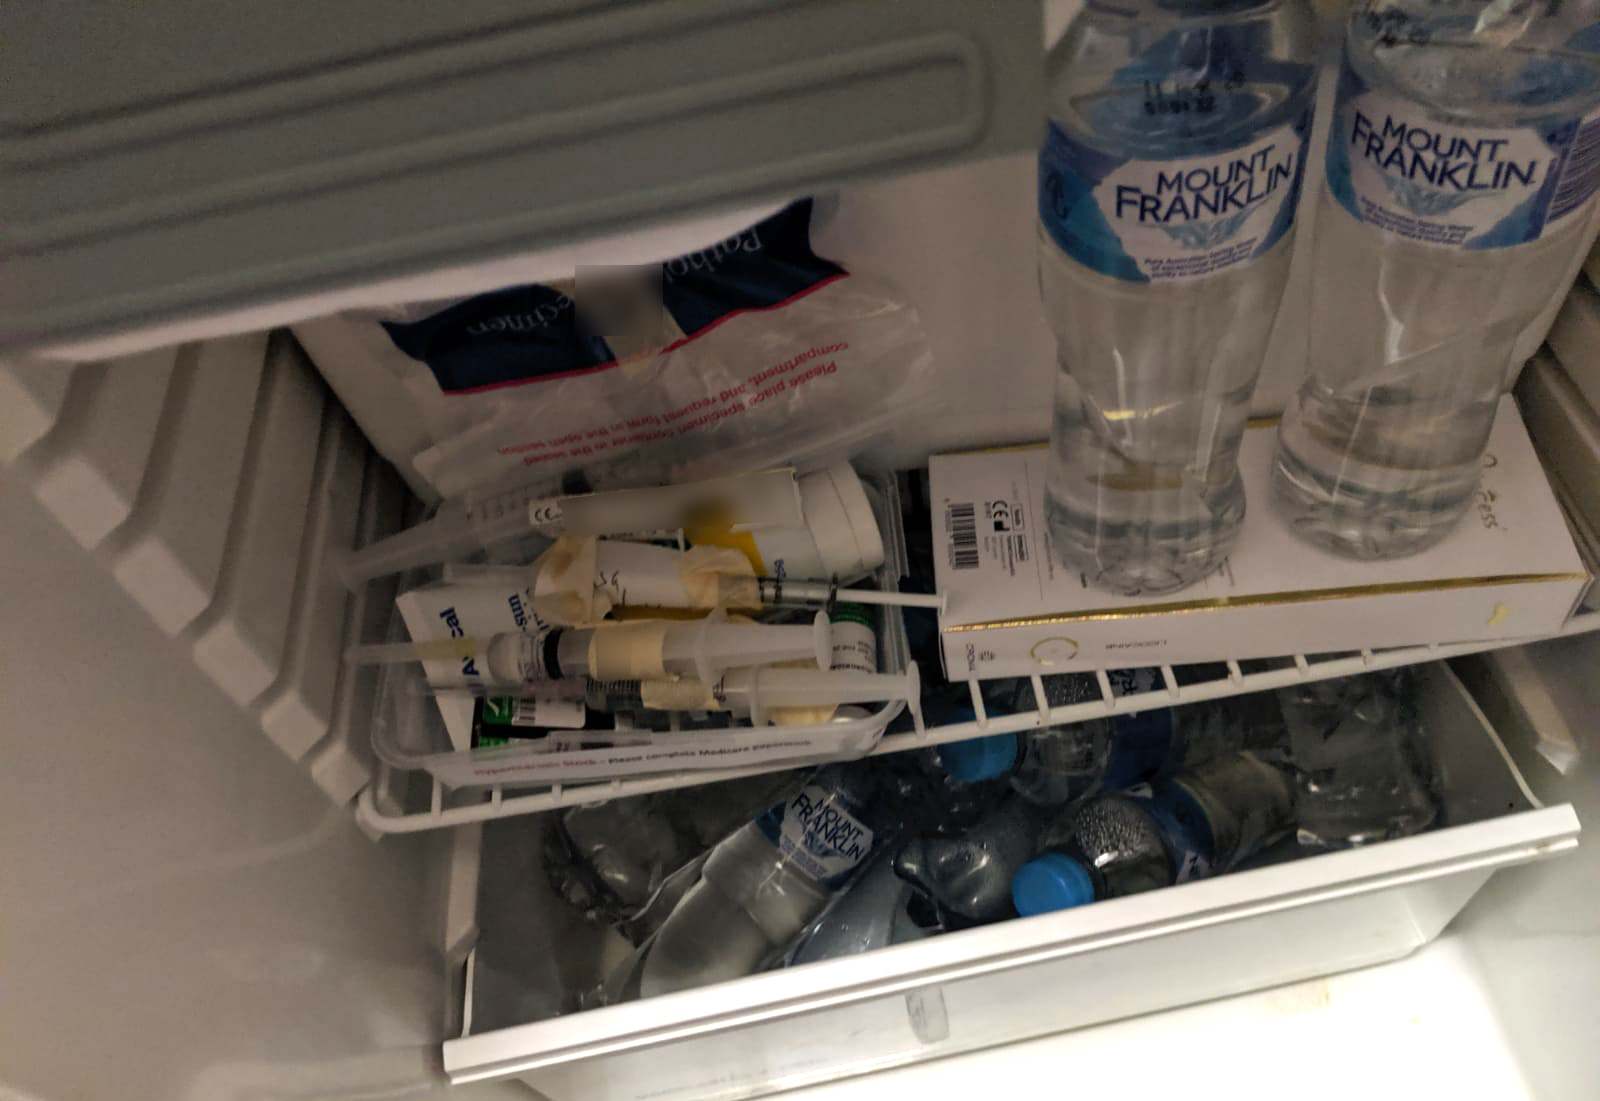 Image inside a fridge at a Dr Lanzer clinic.